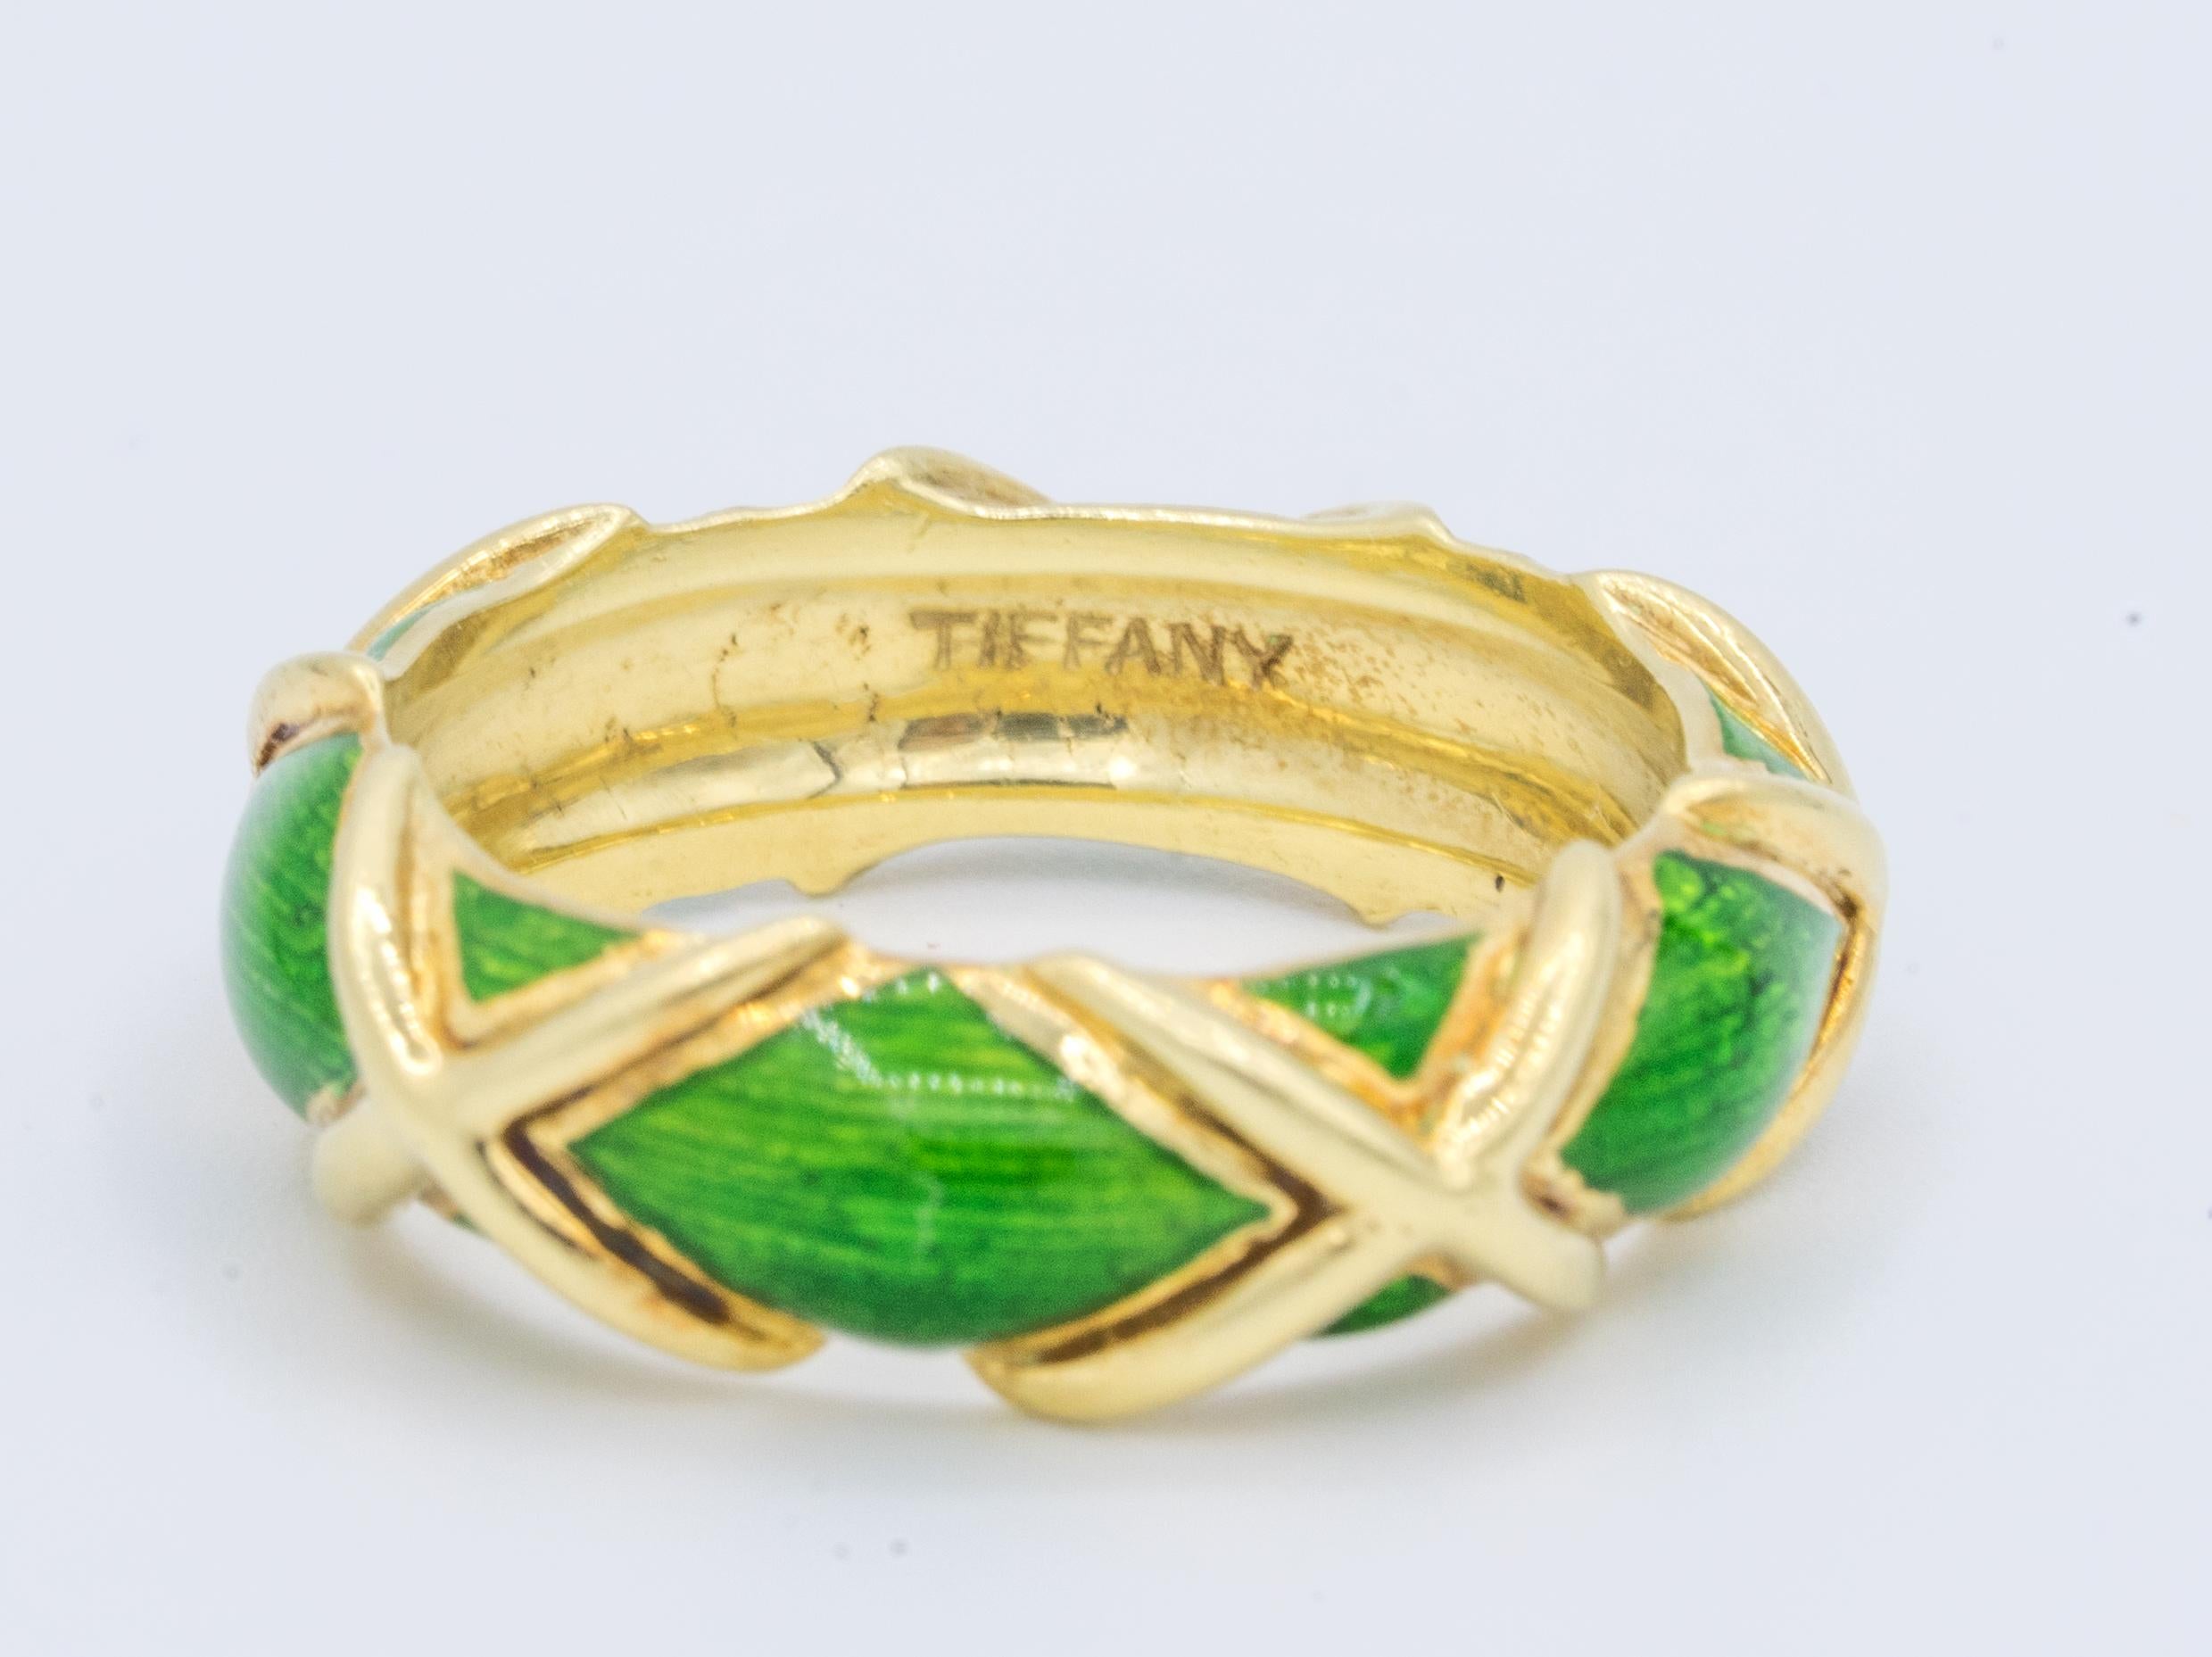 Schlumberger for Tiffany & Co. 18k Gold 'X' and Green Enamel design Circa 1960's

Designer: Jean Schlumberger
Brand: Tiffany & Co.
Ring Size 6
Width: 6.5 mm
Signed: TIFFANY 
Stamped: 18K

Circa 1960's
Condition: Pre-Owned, Minor gold discoloration